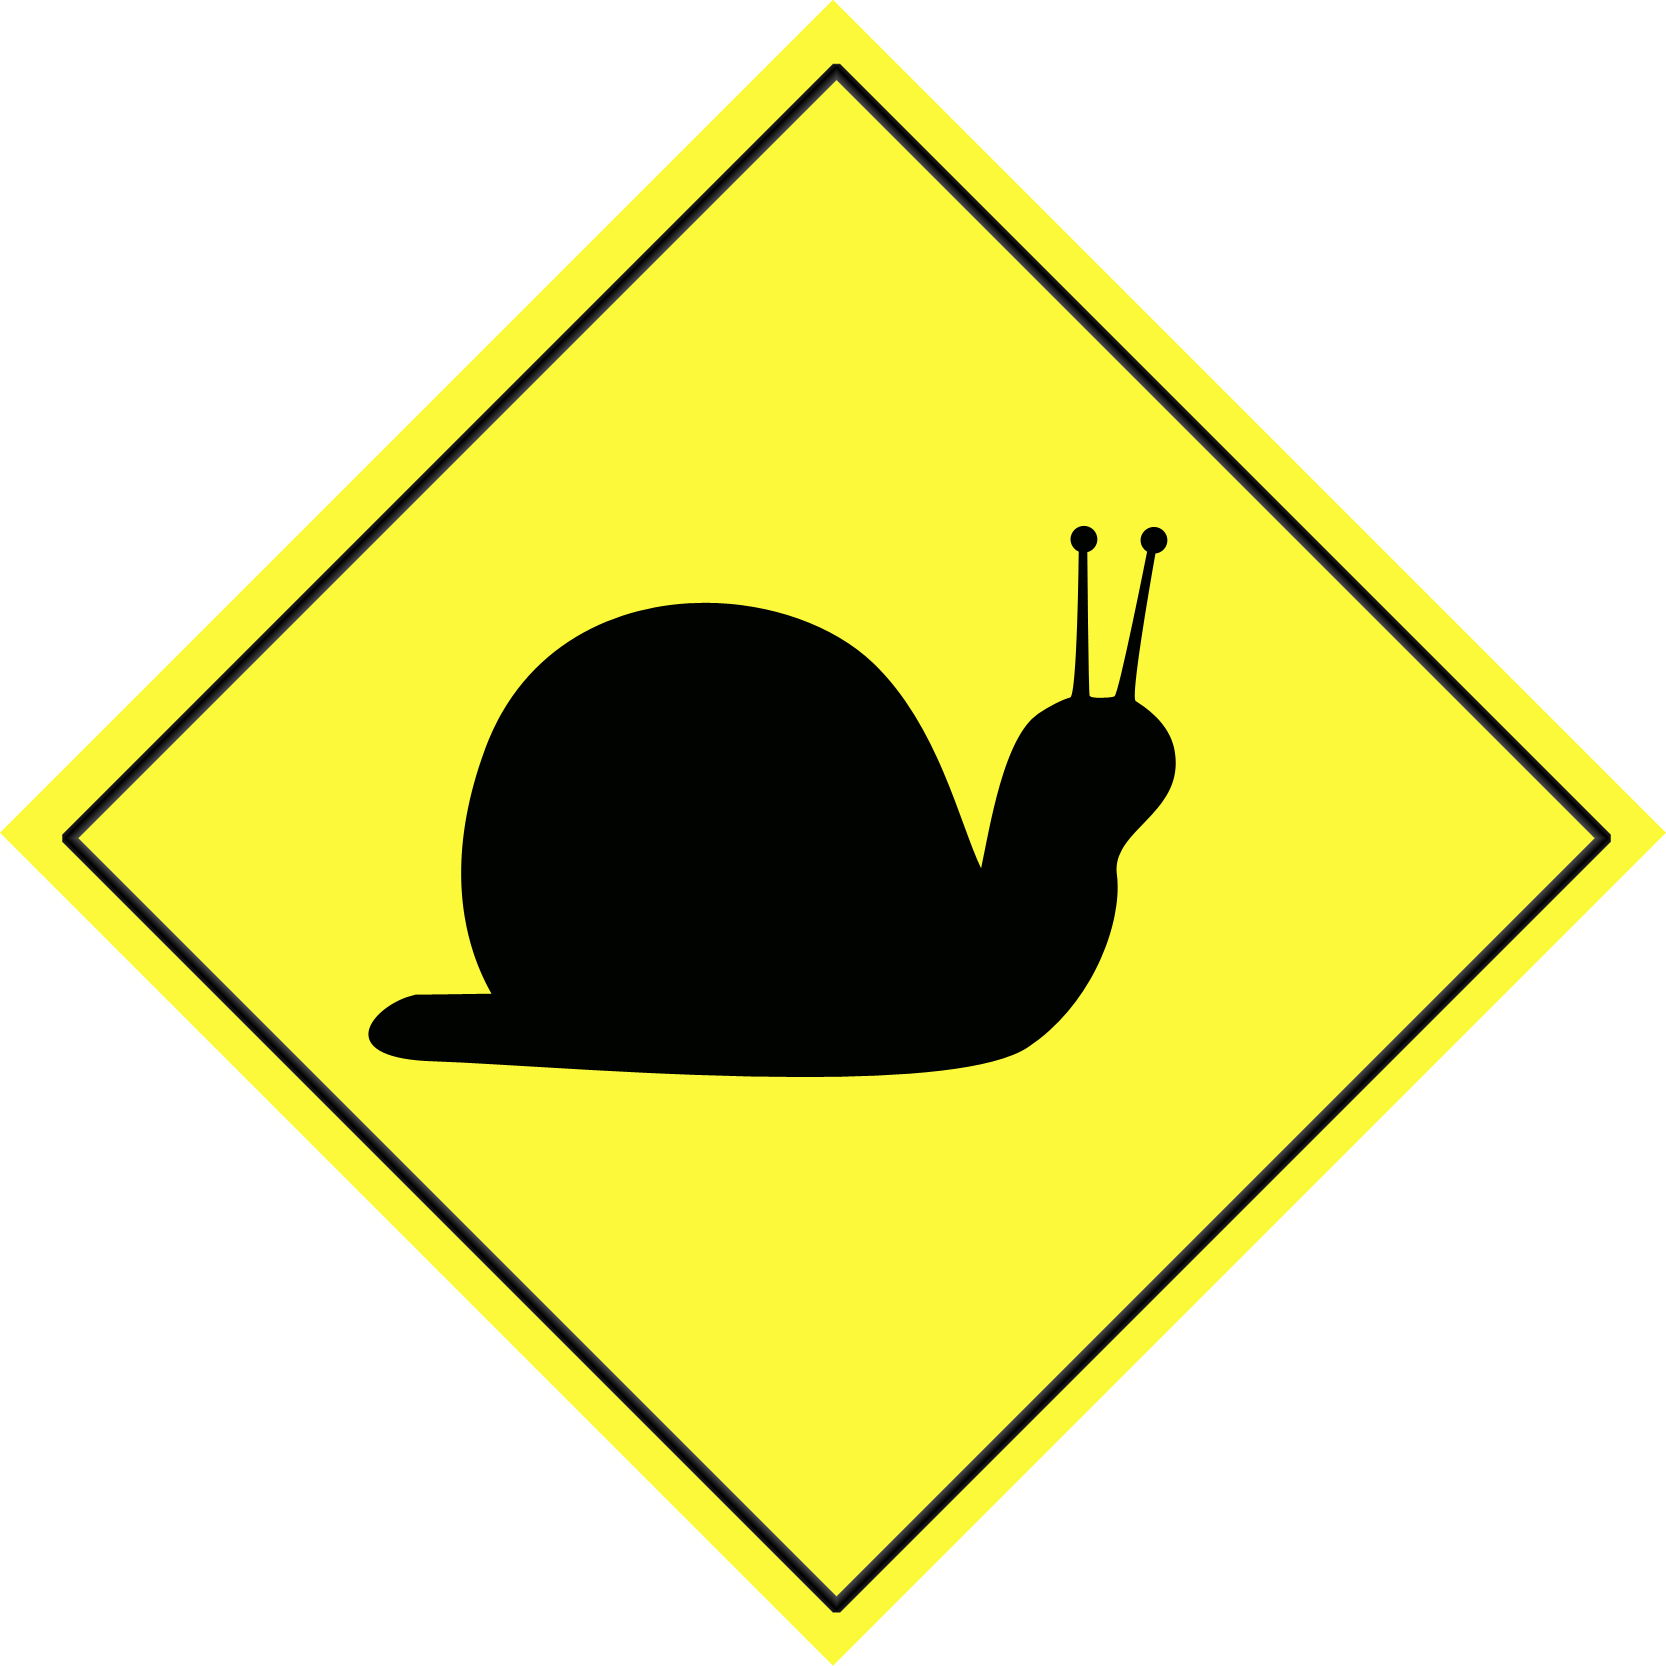 Free Slow Sign Cliparts, Download Free Clip Art, Free Clip.